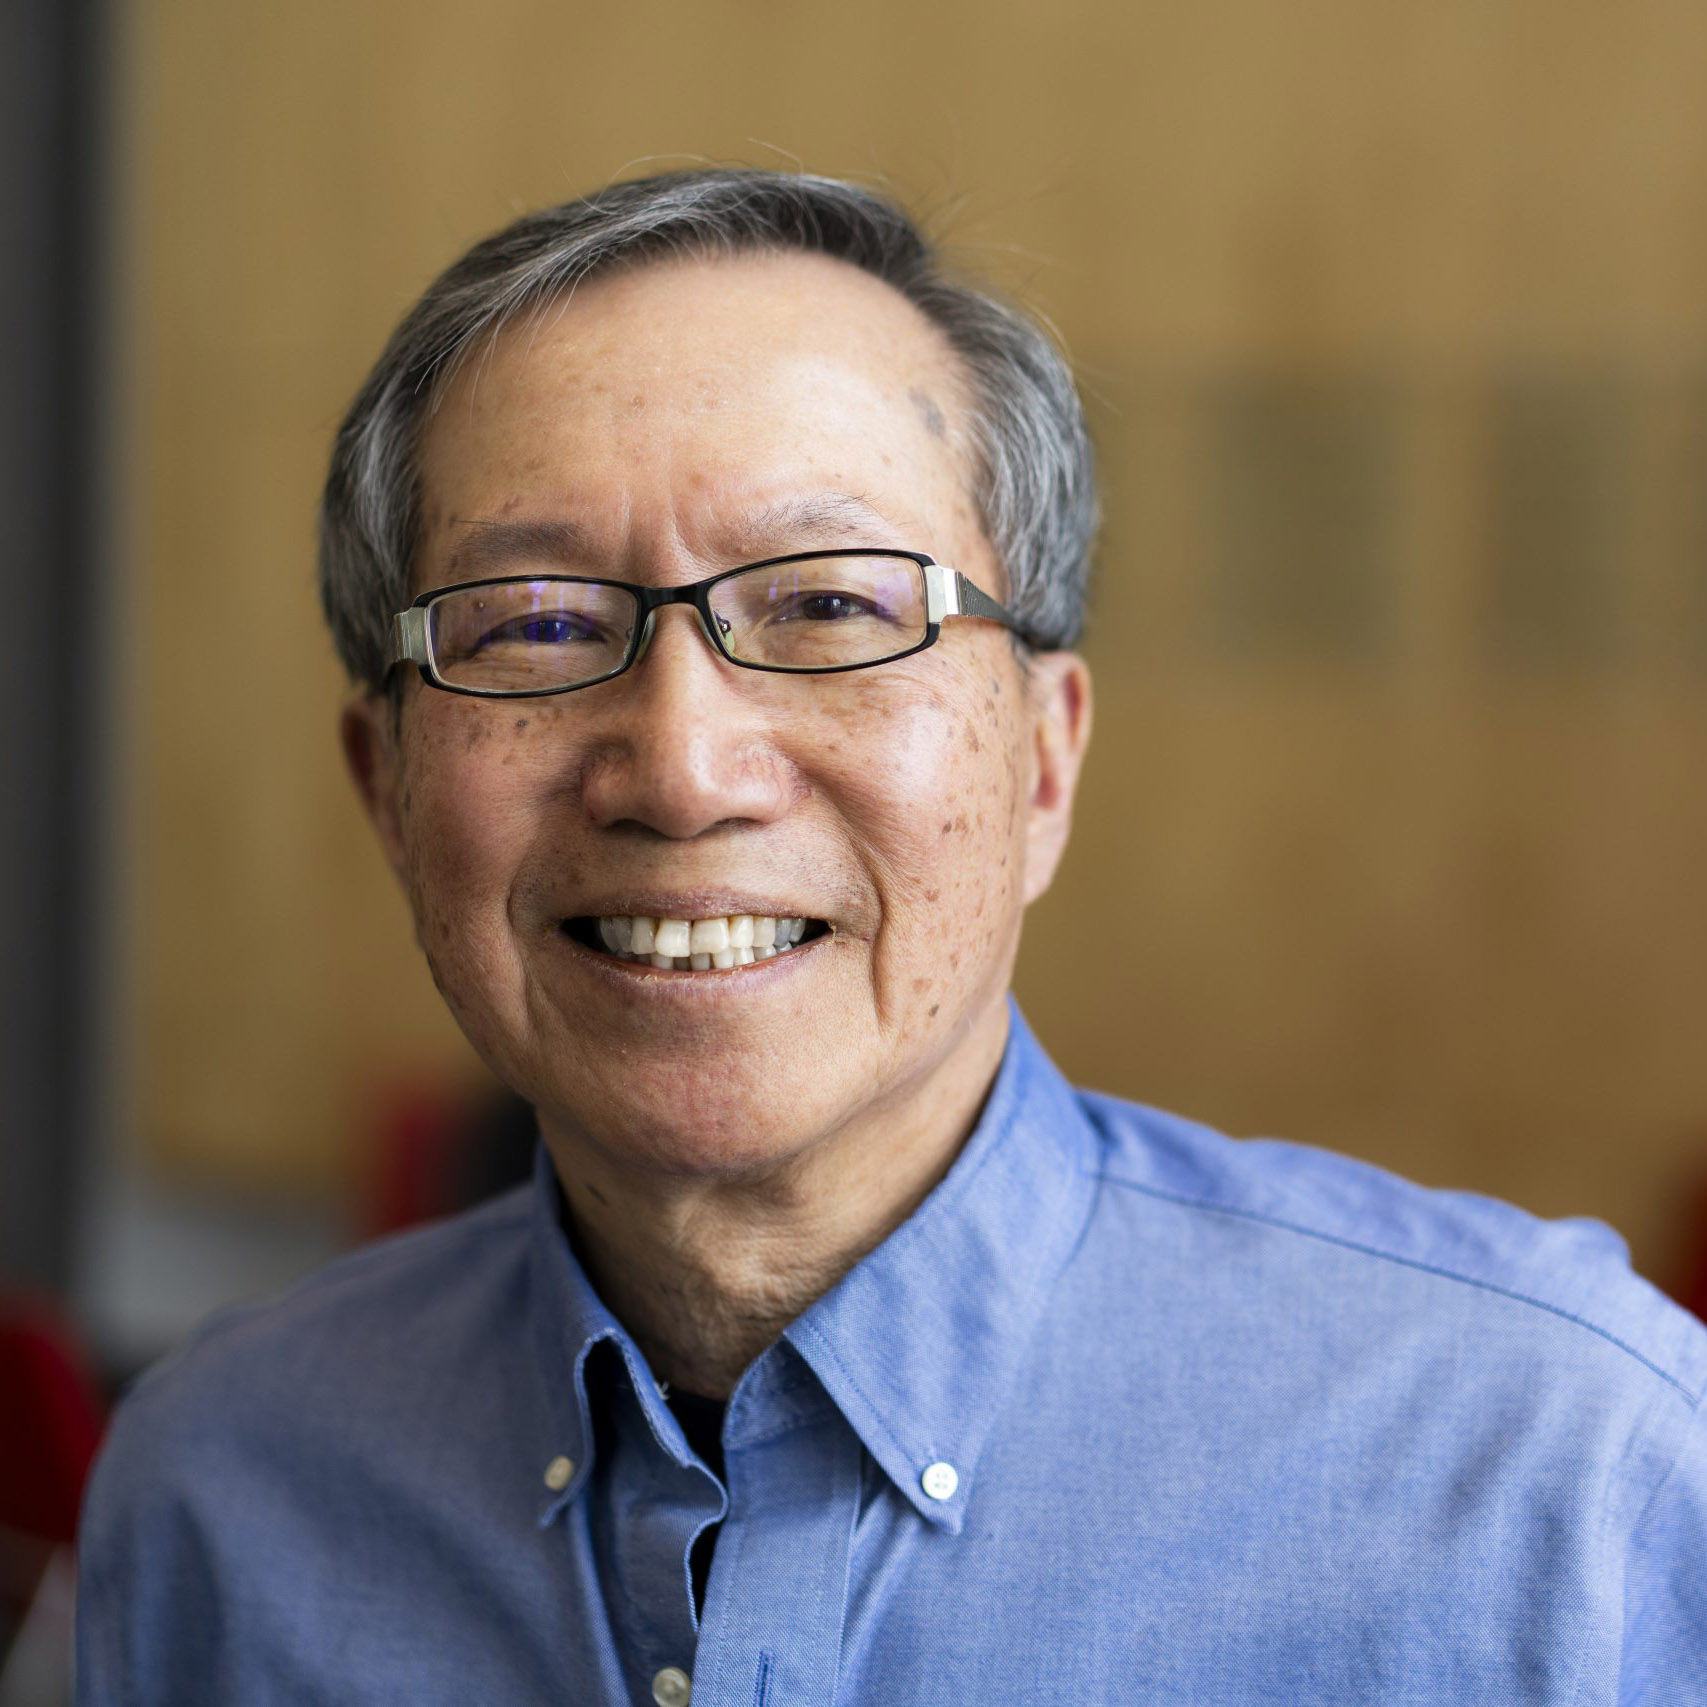 Headshot of Vincent Cheng smiling at the camera wearing a light blue button down